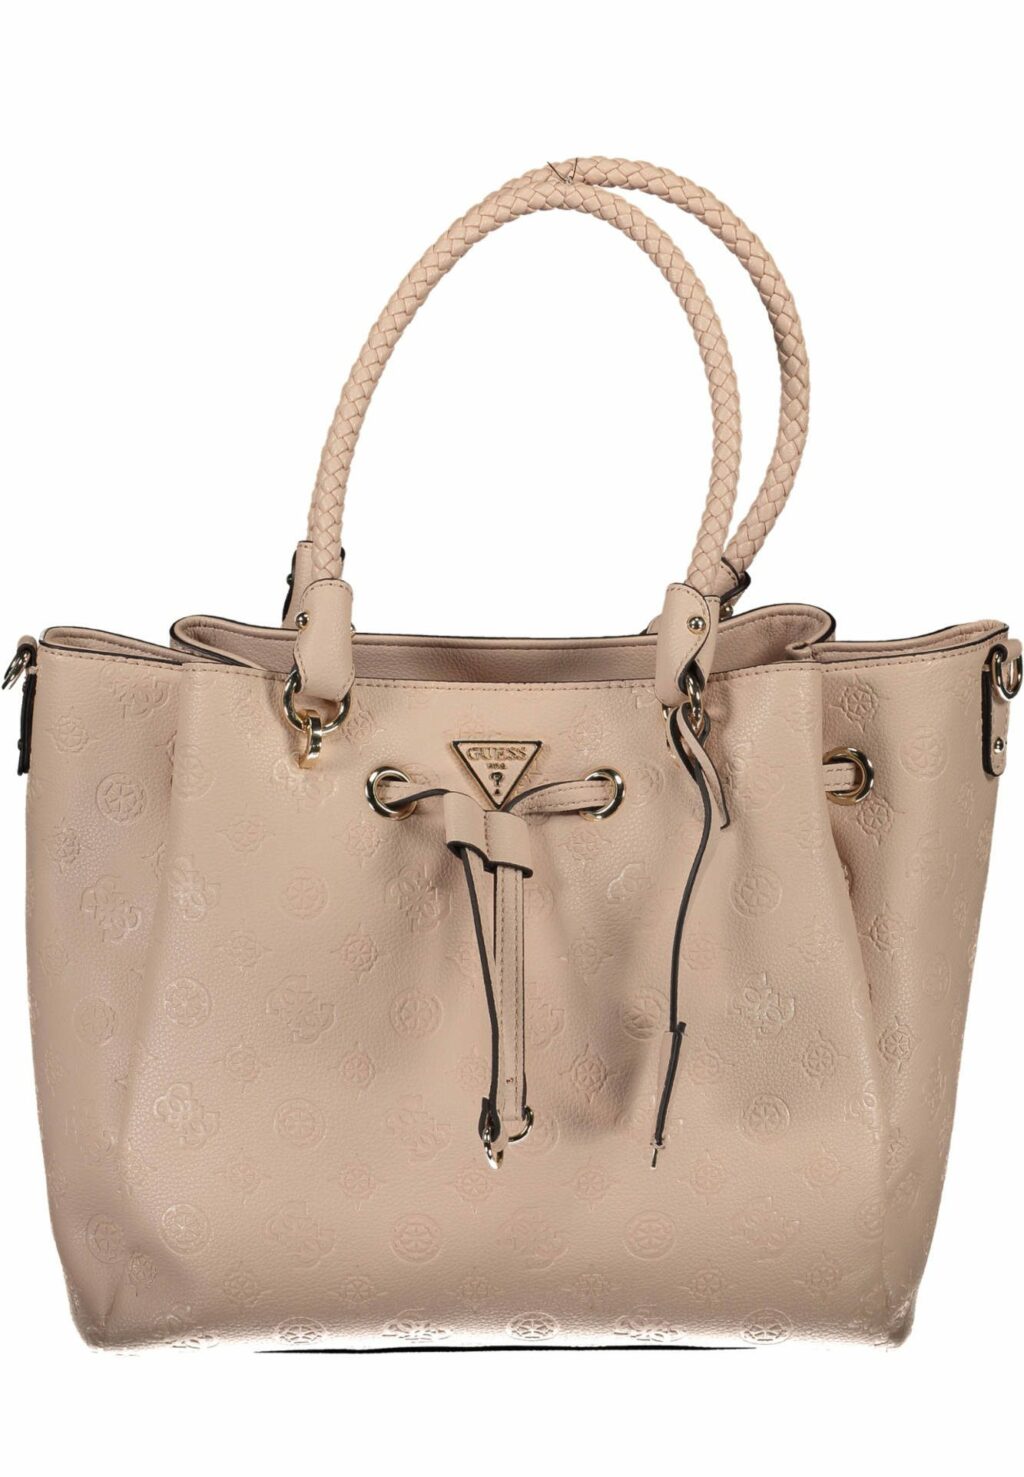 GUESS JEANS WOMEN'S BAG PINK PG840331_ROSA_ALMOND